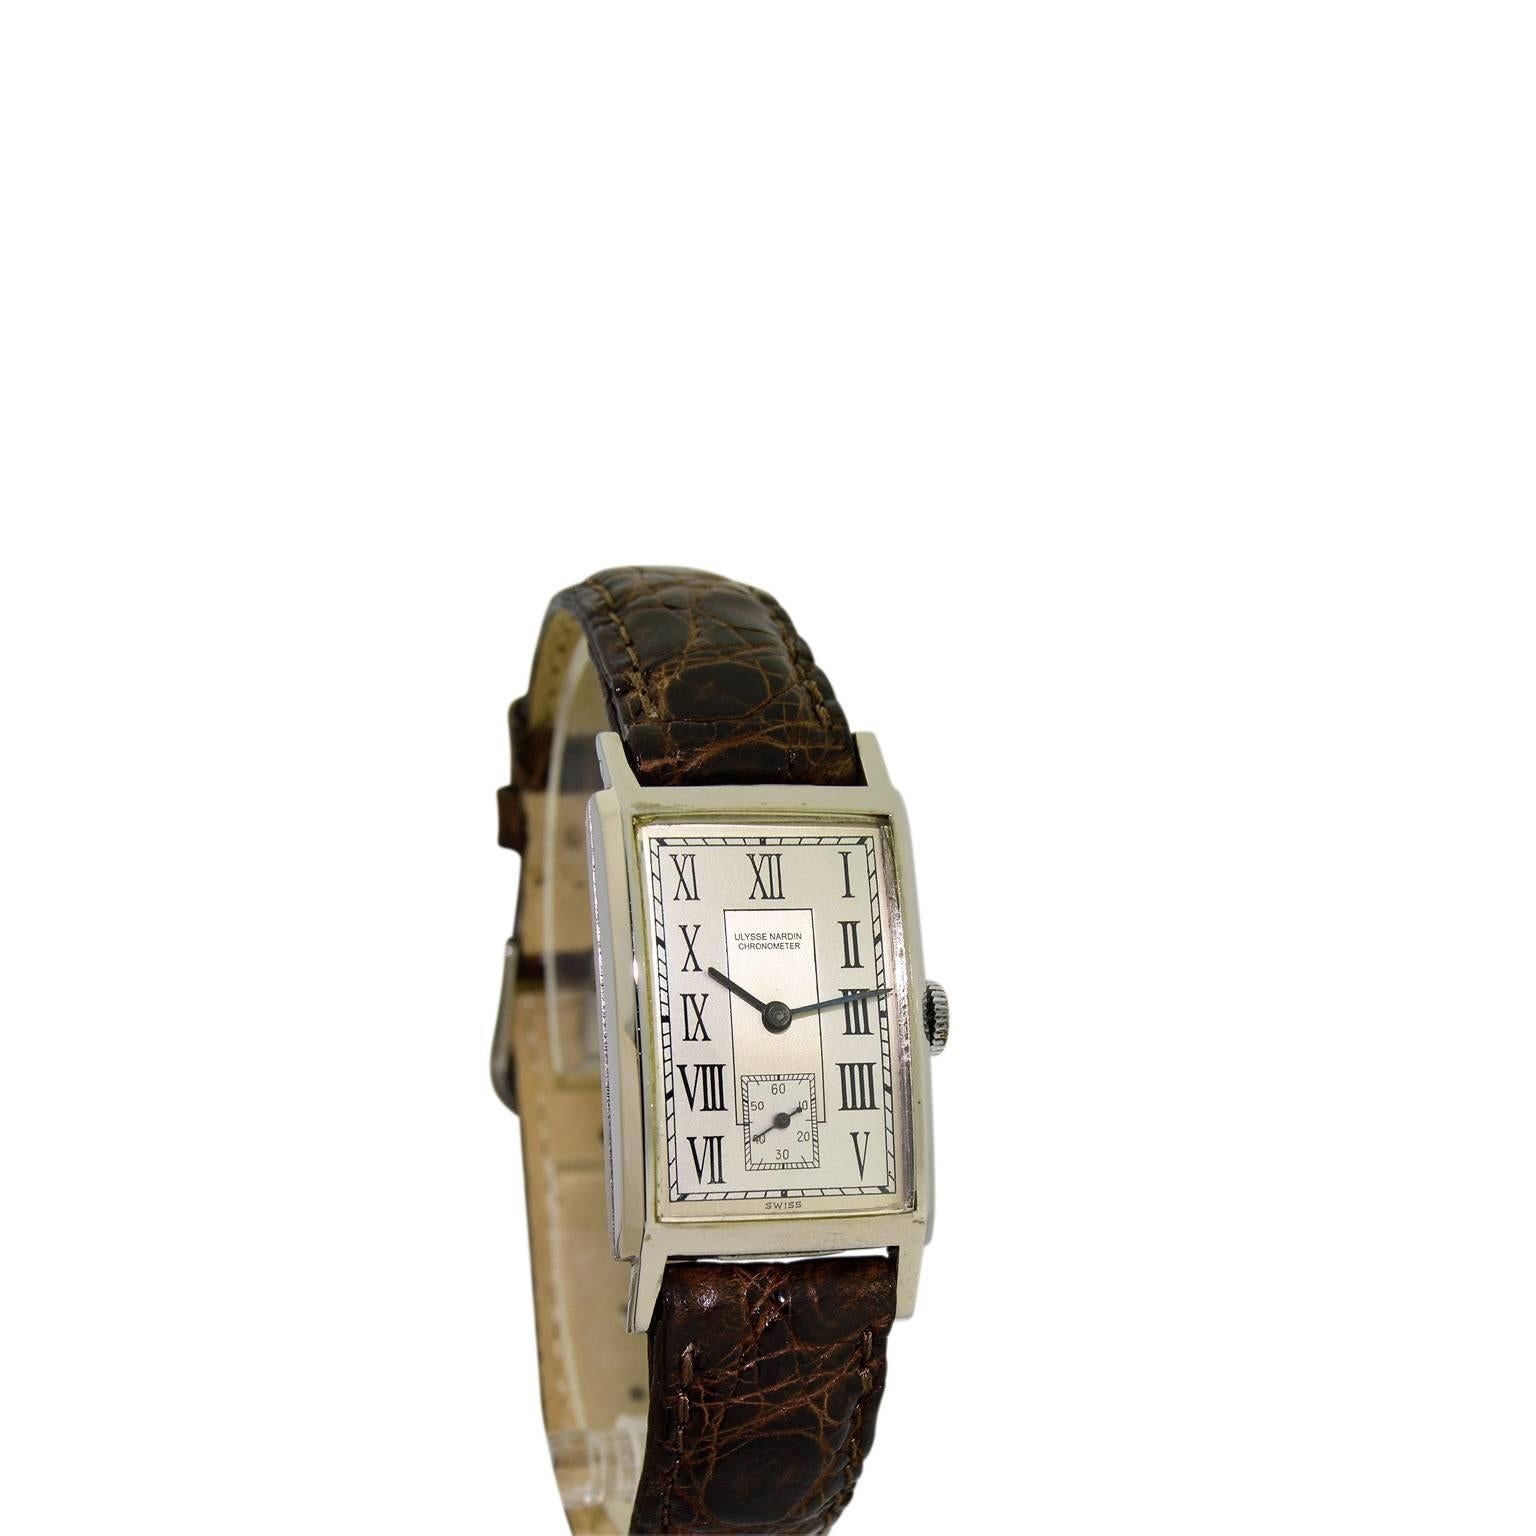 1930s style watch